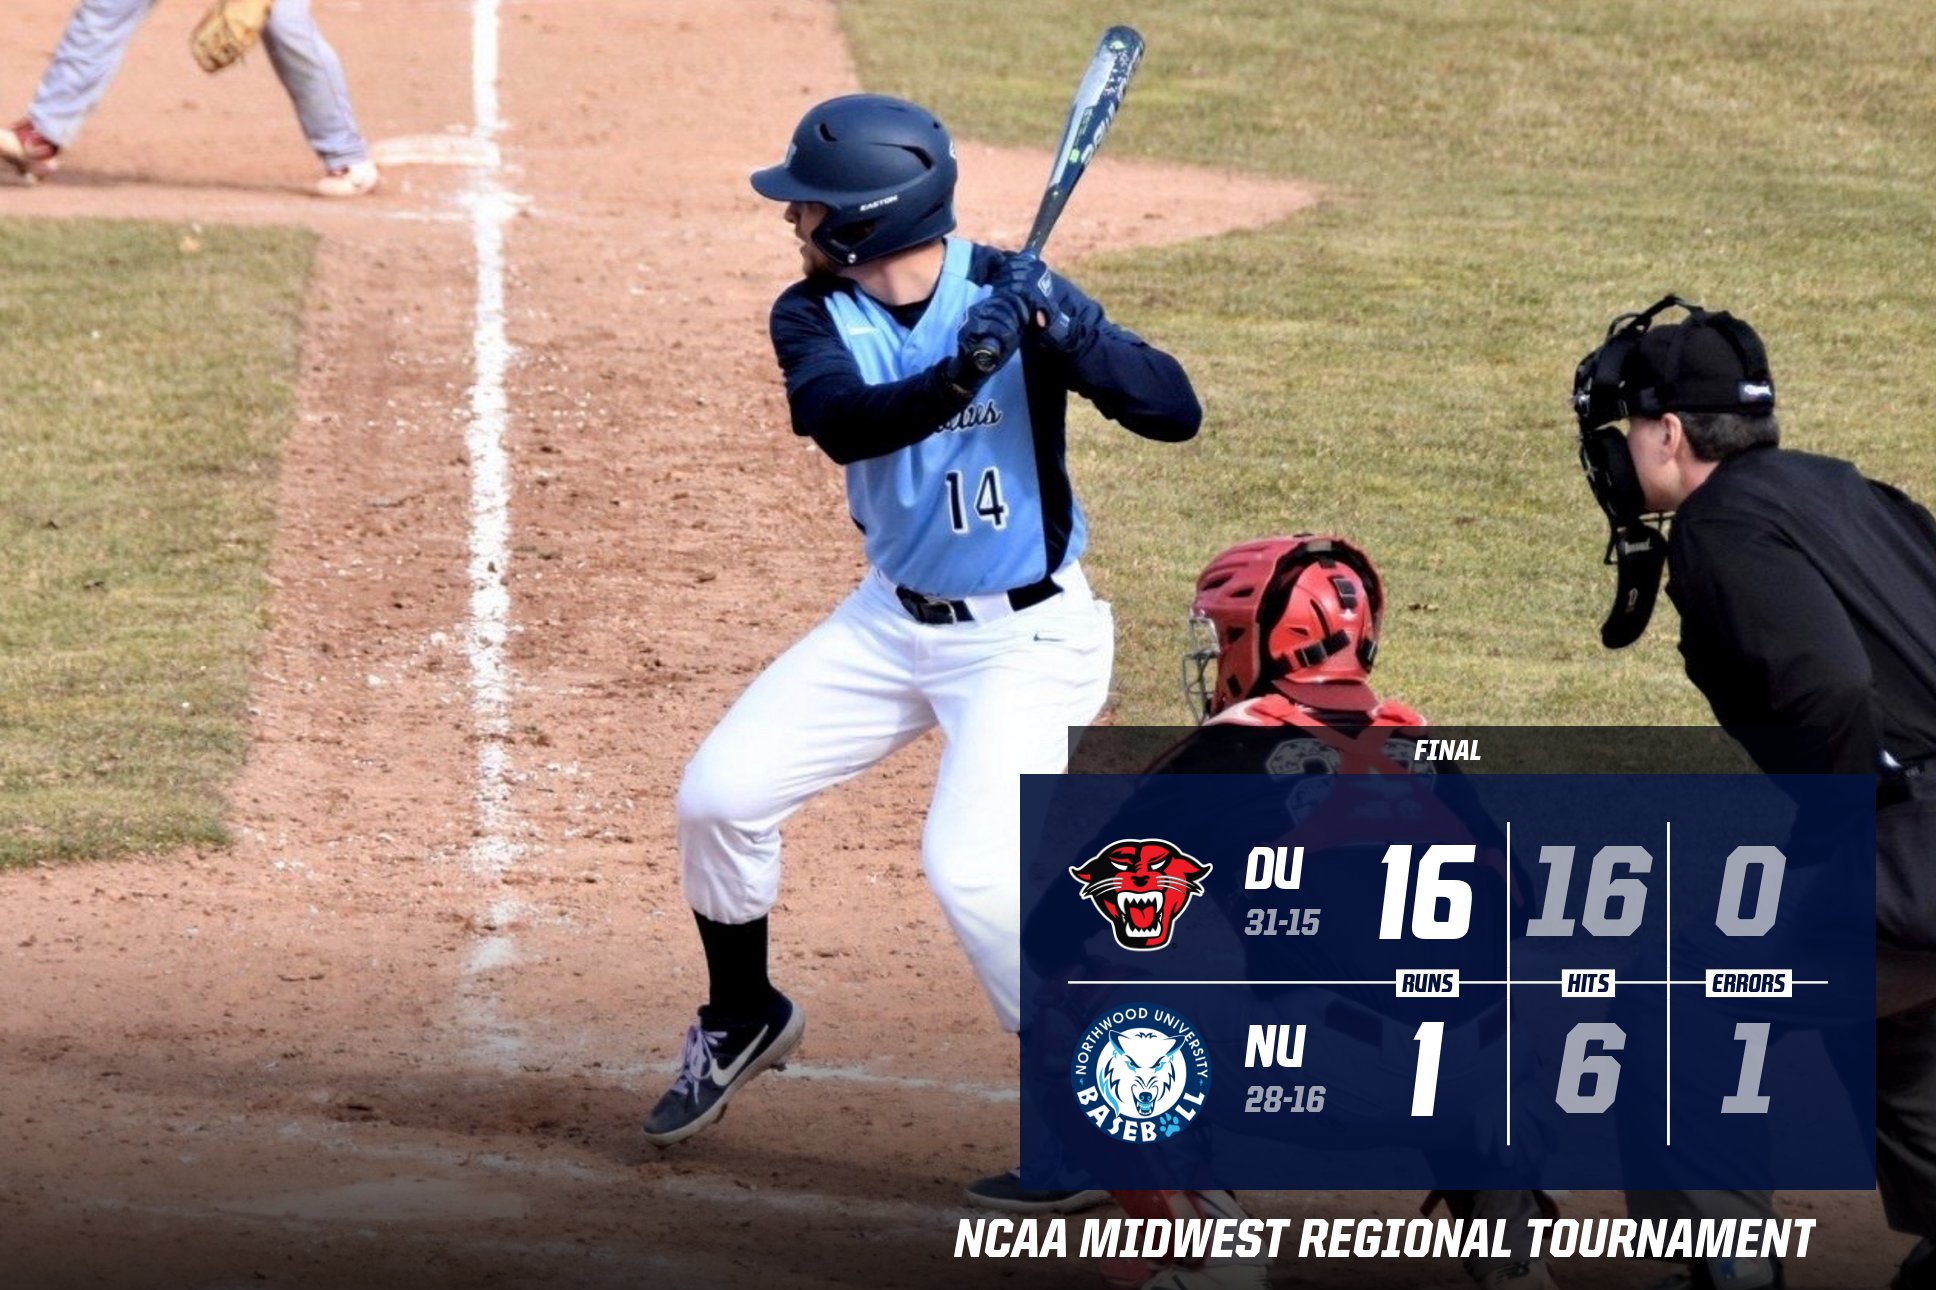 Baseball Drops 16-1 Game To Davenport At NCAA Midwest Regional